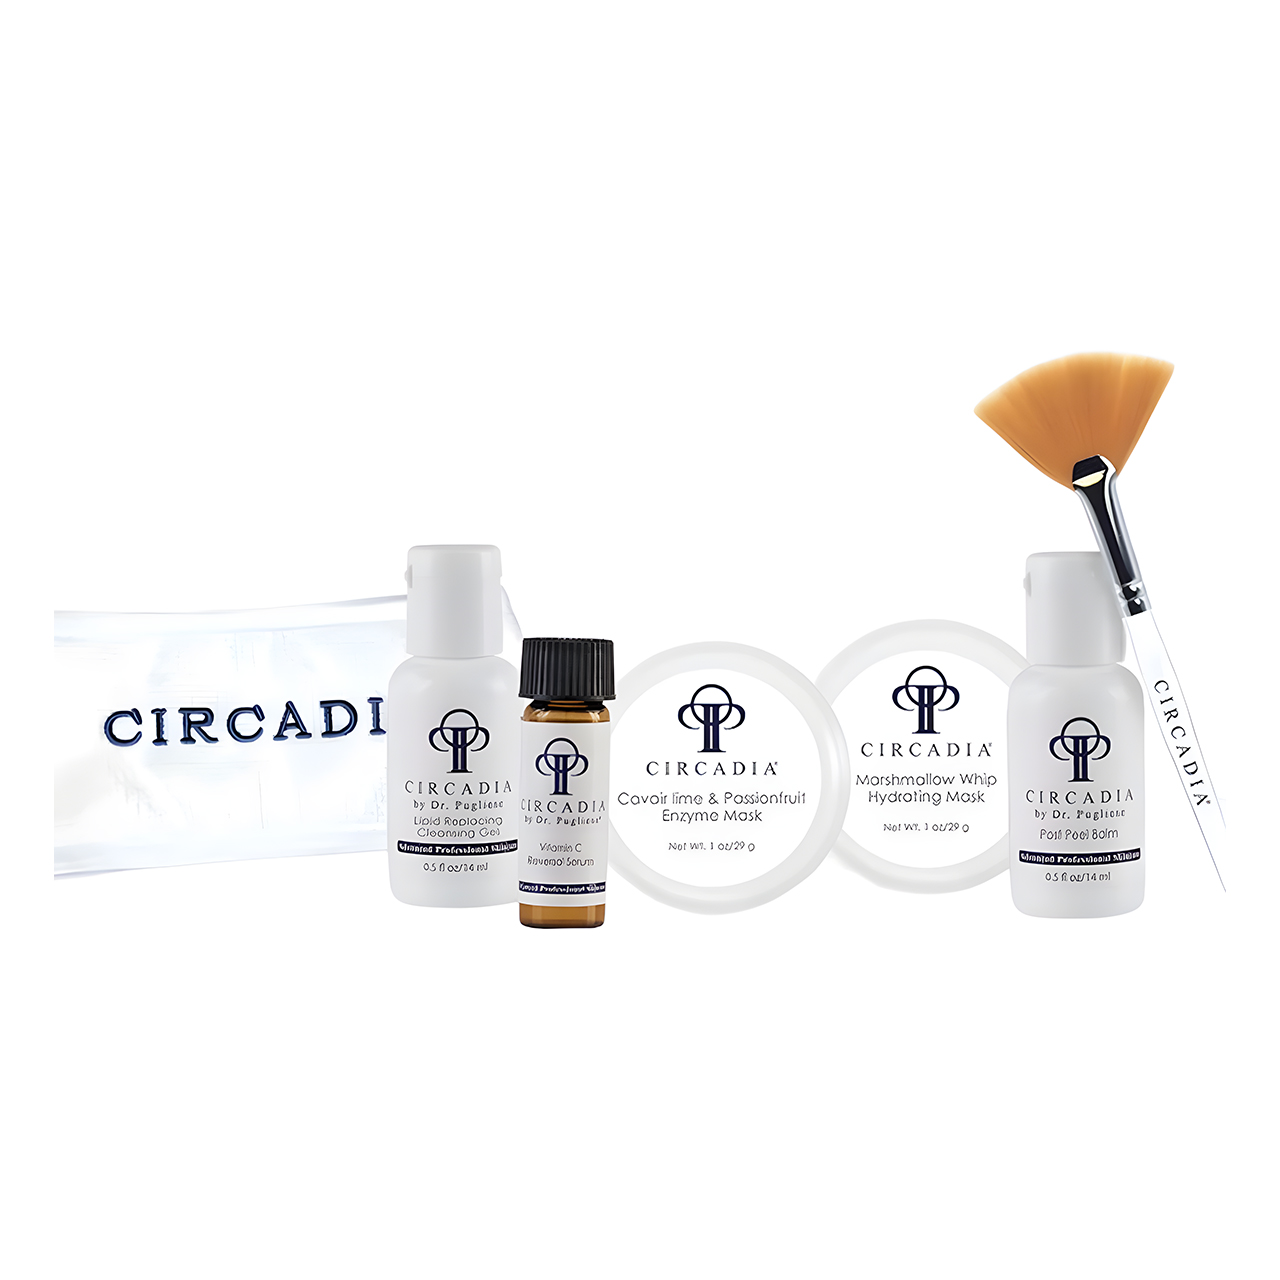 Circadia Staycation Home Facial Kit Questions & Answers